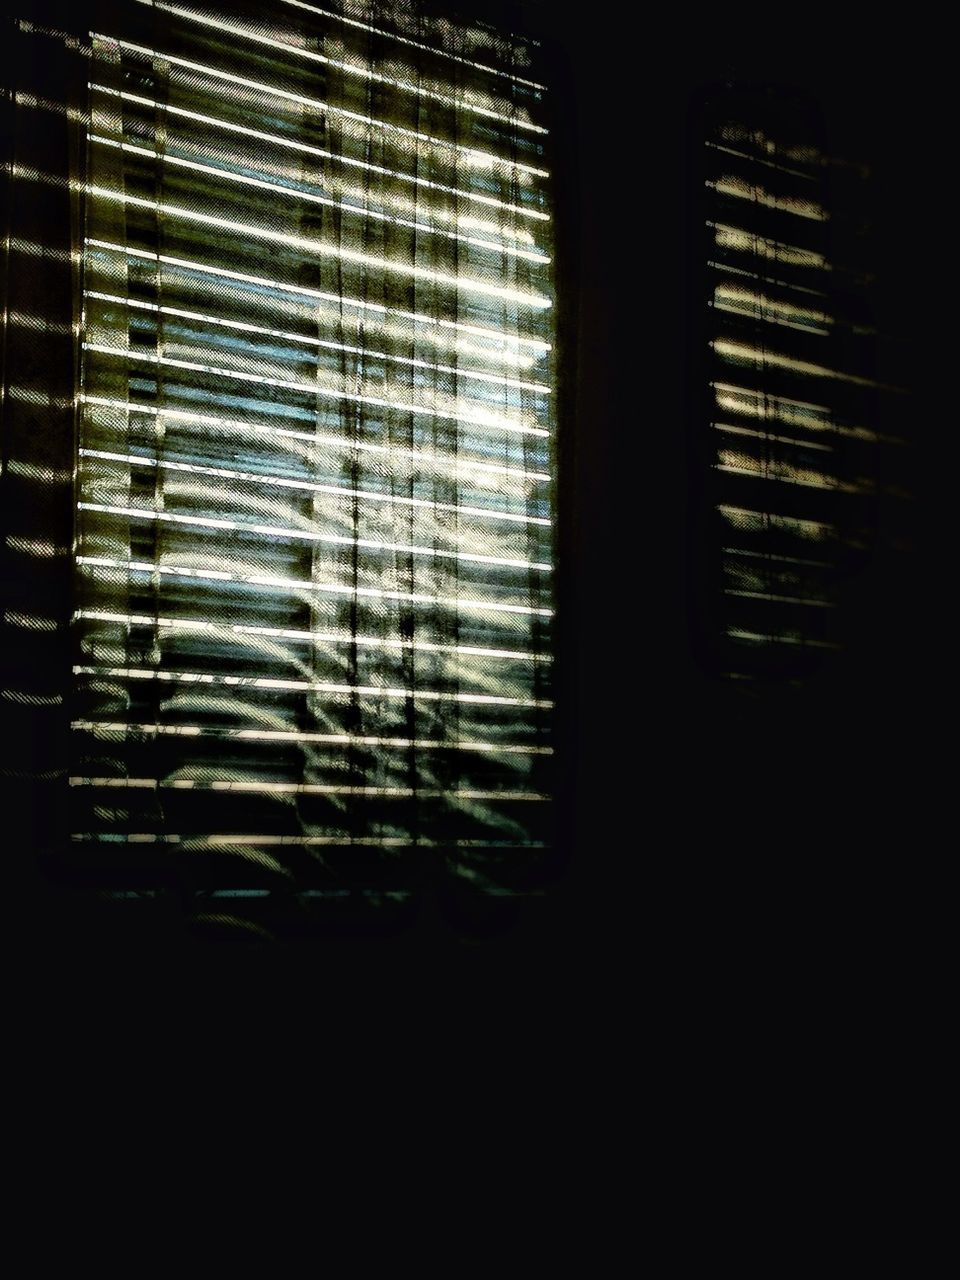 indoors, window, dark, glass - material, transparent, blinds, architecture, home interior, built structure, no people, curtain, close-up, illuminated, house, reflection, pattern, sunlight, darkroom, glass, day